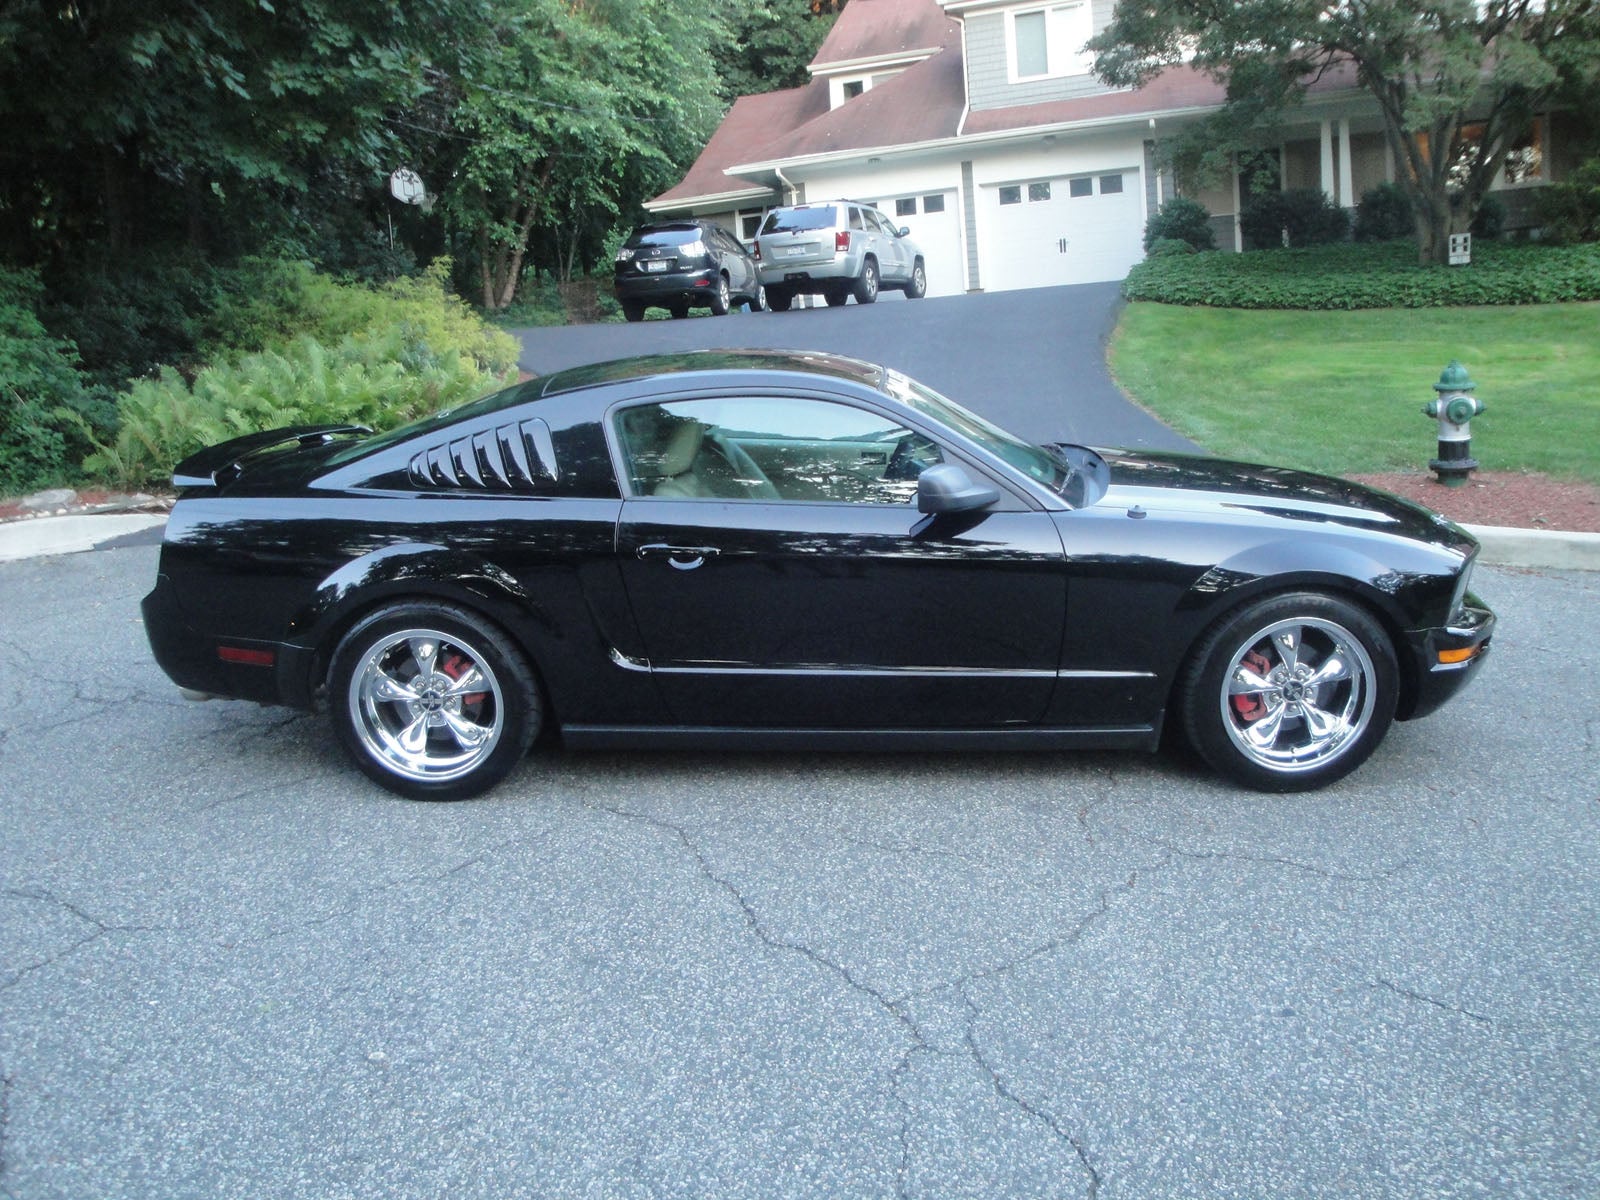 2005 Ford mustang for sale in new york #1